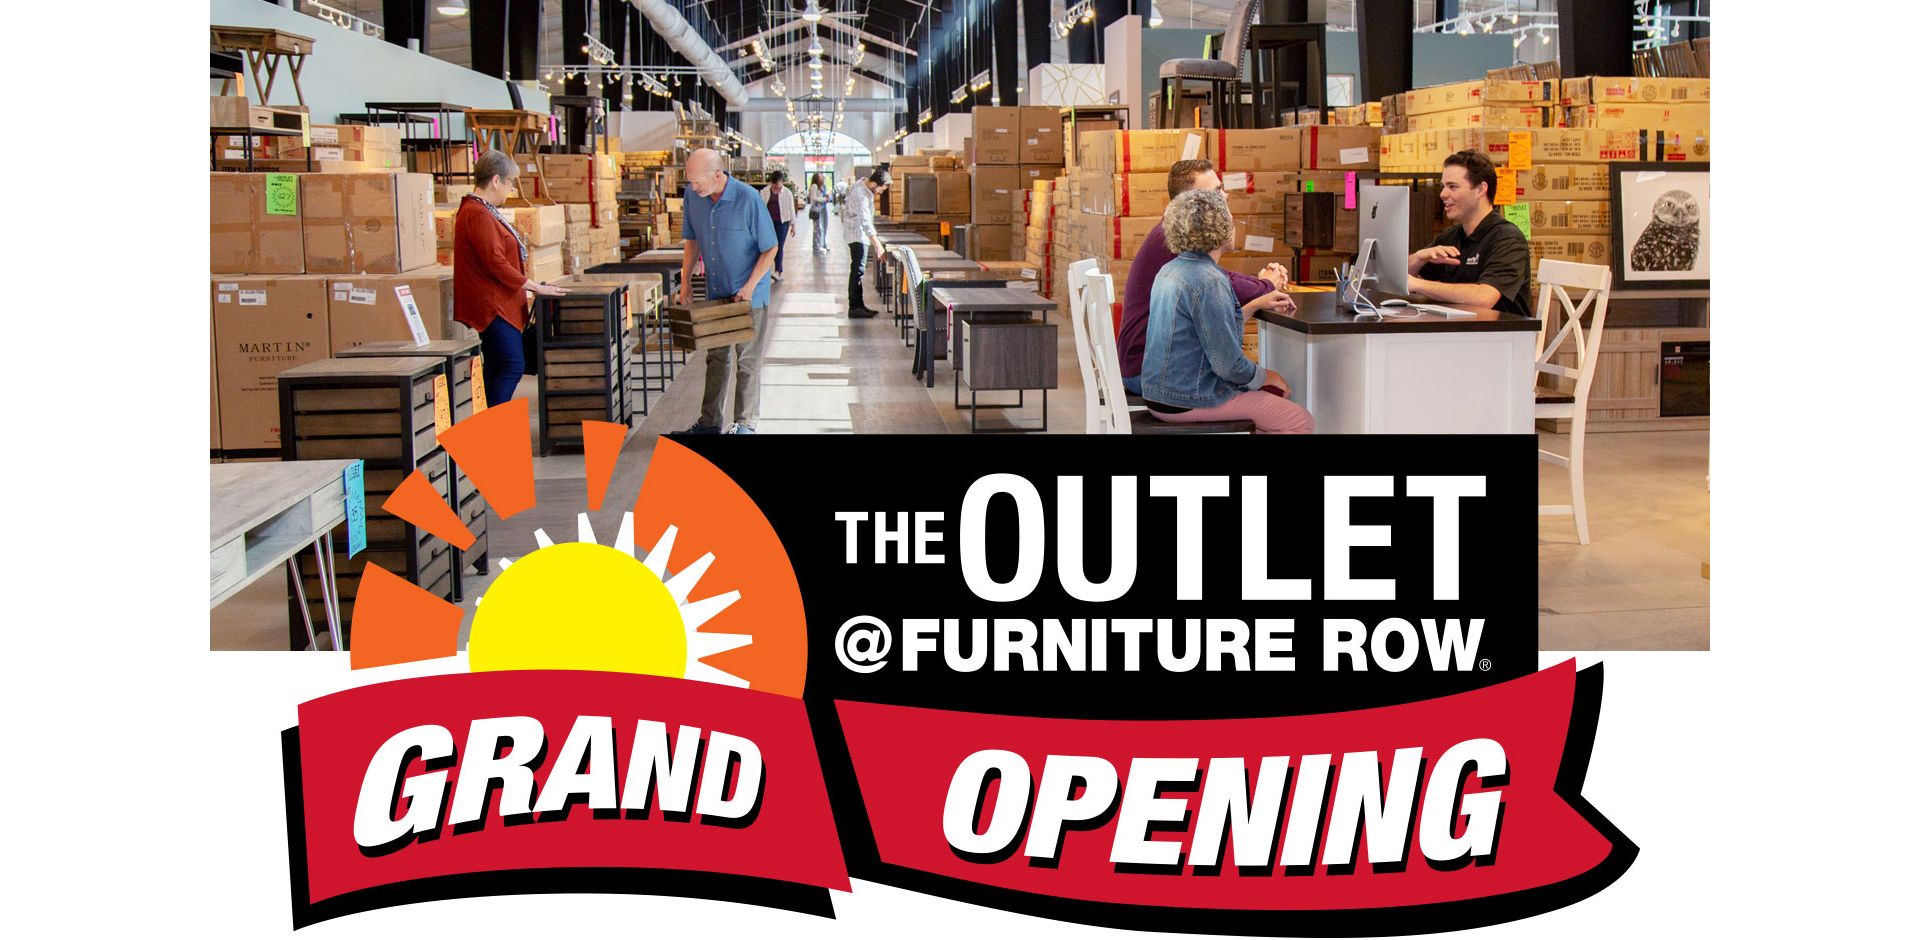 s Overstock Outlet Has Furniture on Sale Now